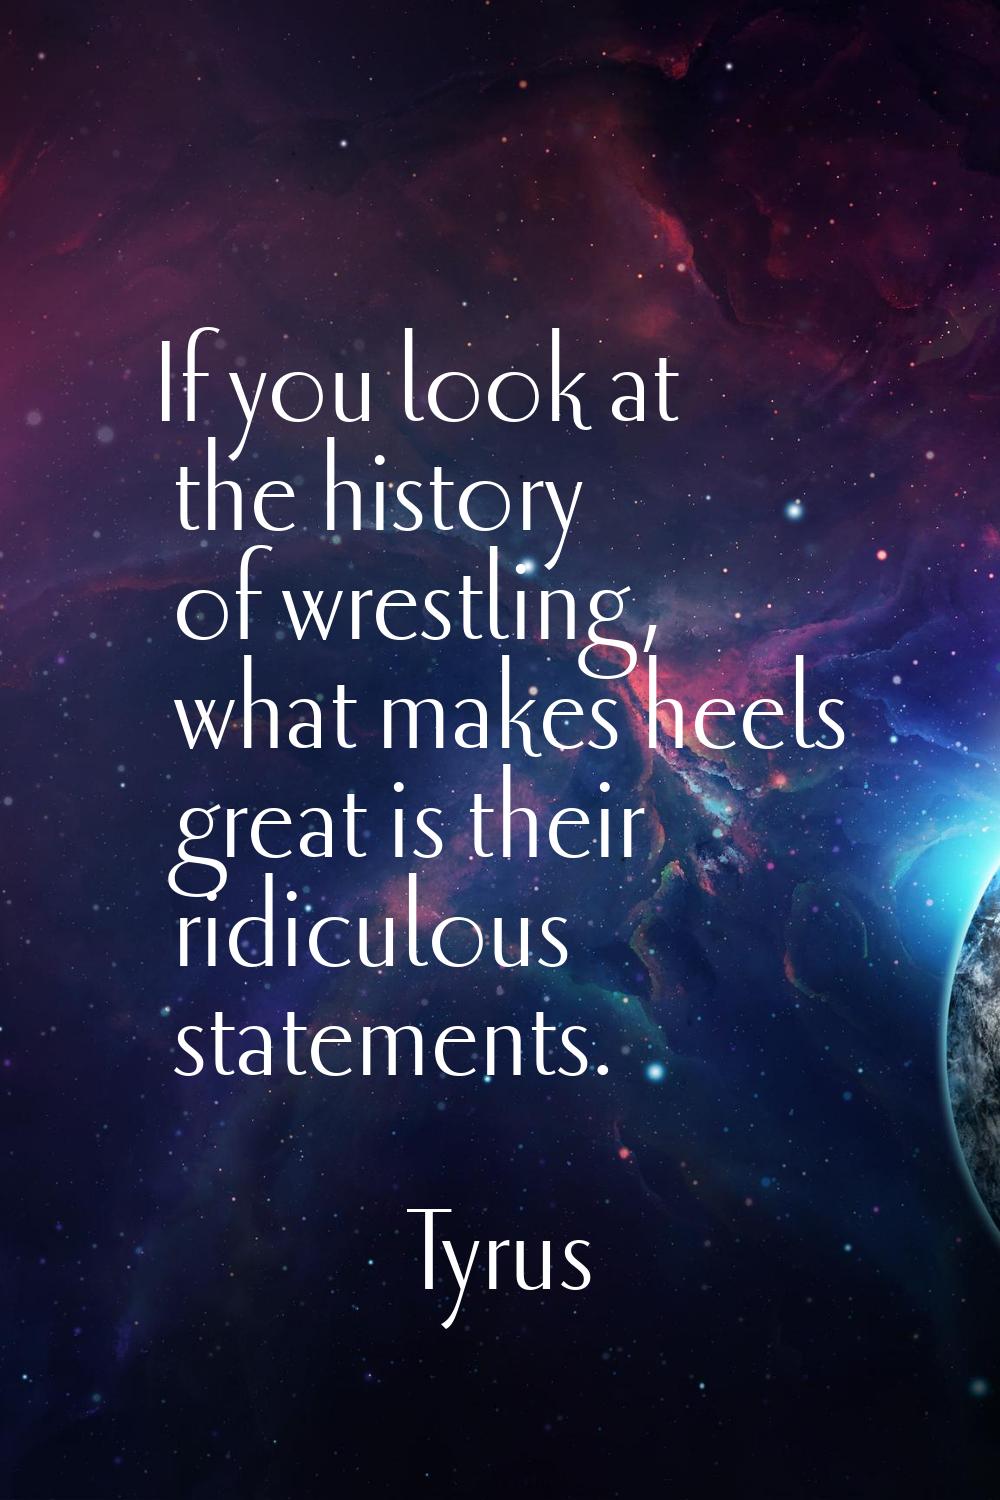 If you look at the history of wrestling, what makes heels great is their ridiculous statements.